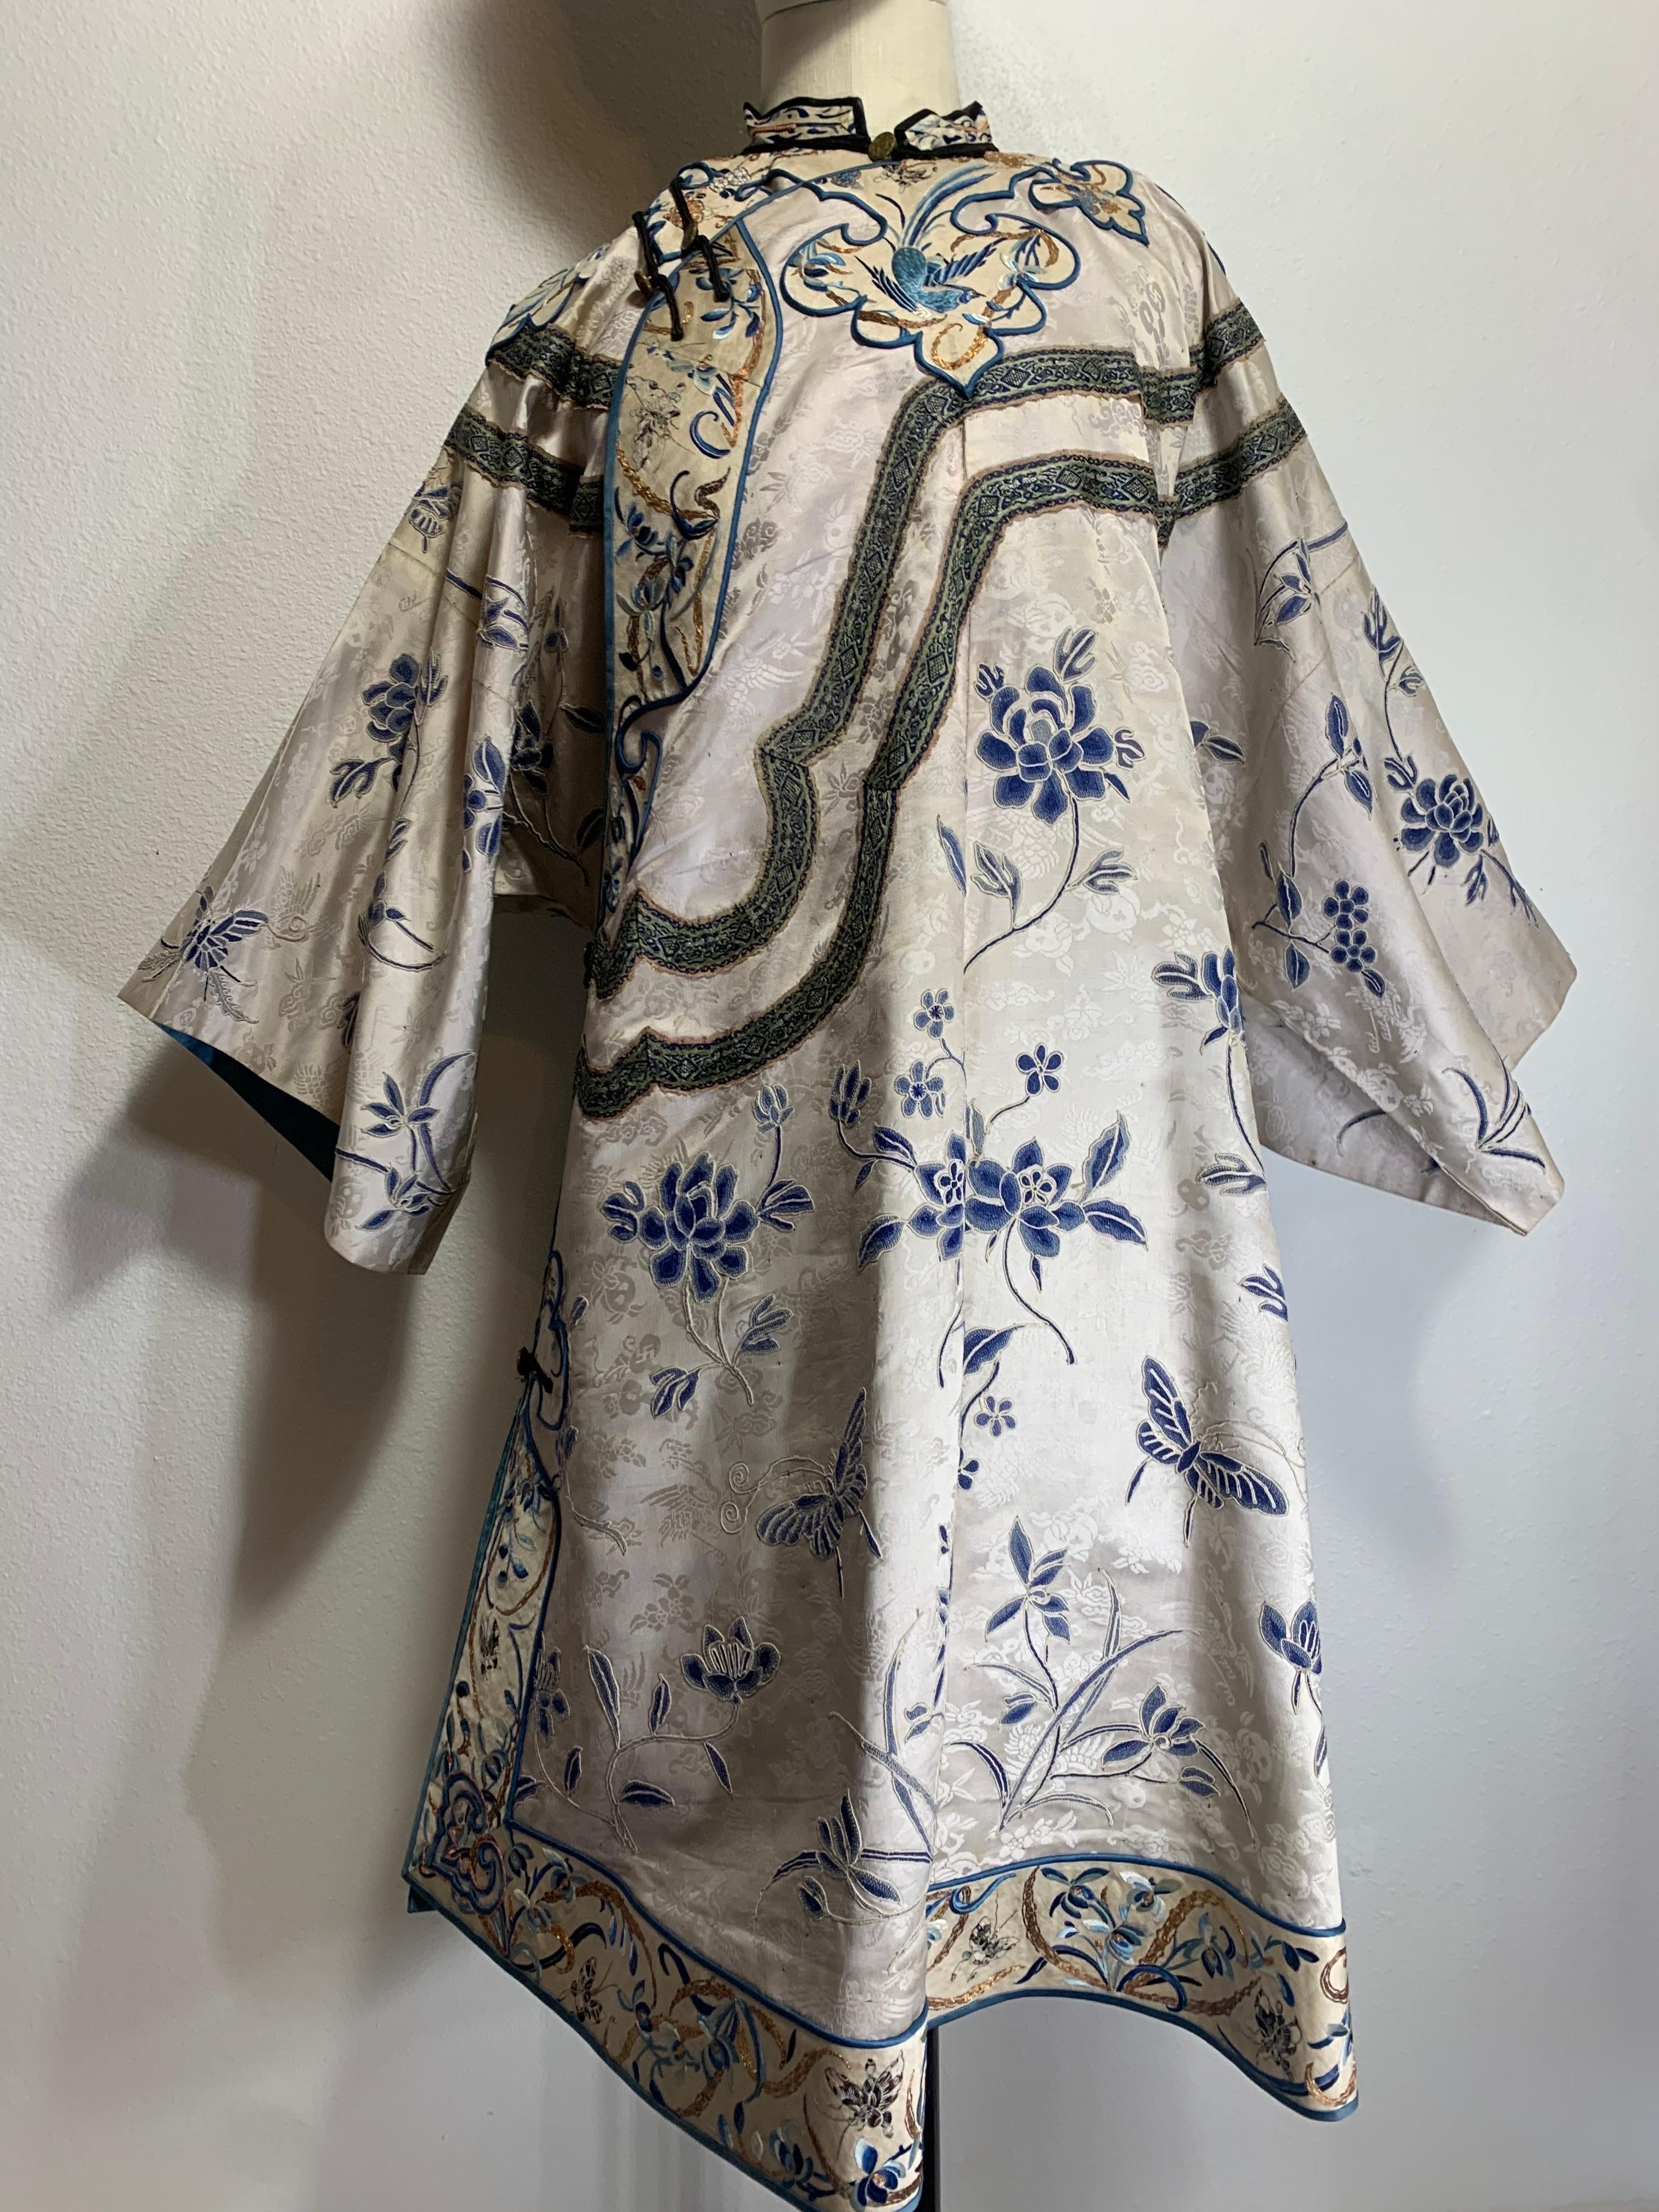 1920s Chinese Traditional Embroidered Side-Closure Silk Summer Coat in Blues and Porcelain White:  Asymmetrical closing with decorative Chinese floral and butterfly motifs in gold thread embroidery and applied ribbon. Lined in blue silk. Bronze coin